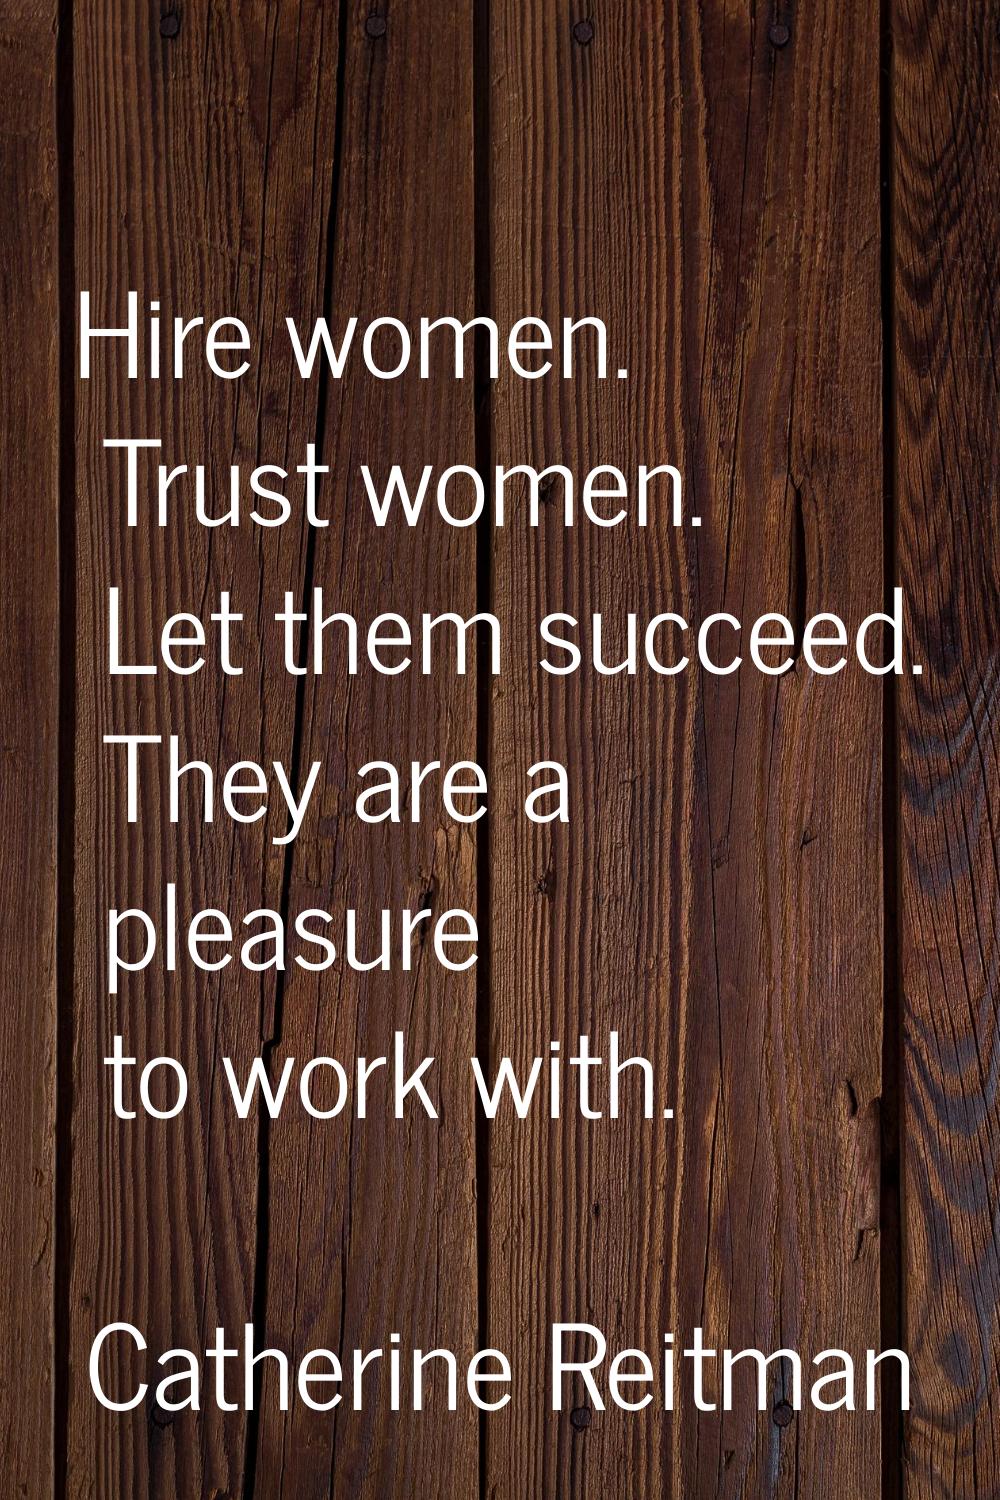 Hire women. Trust women. Let them succeed. They are a pleasure to work with.